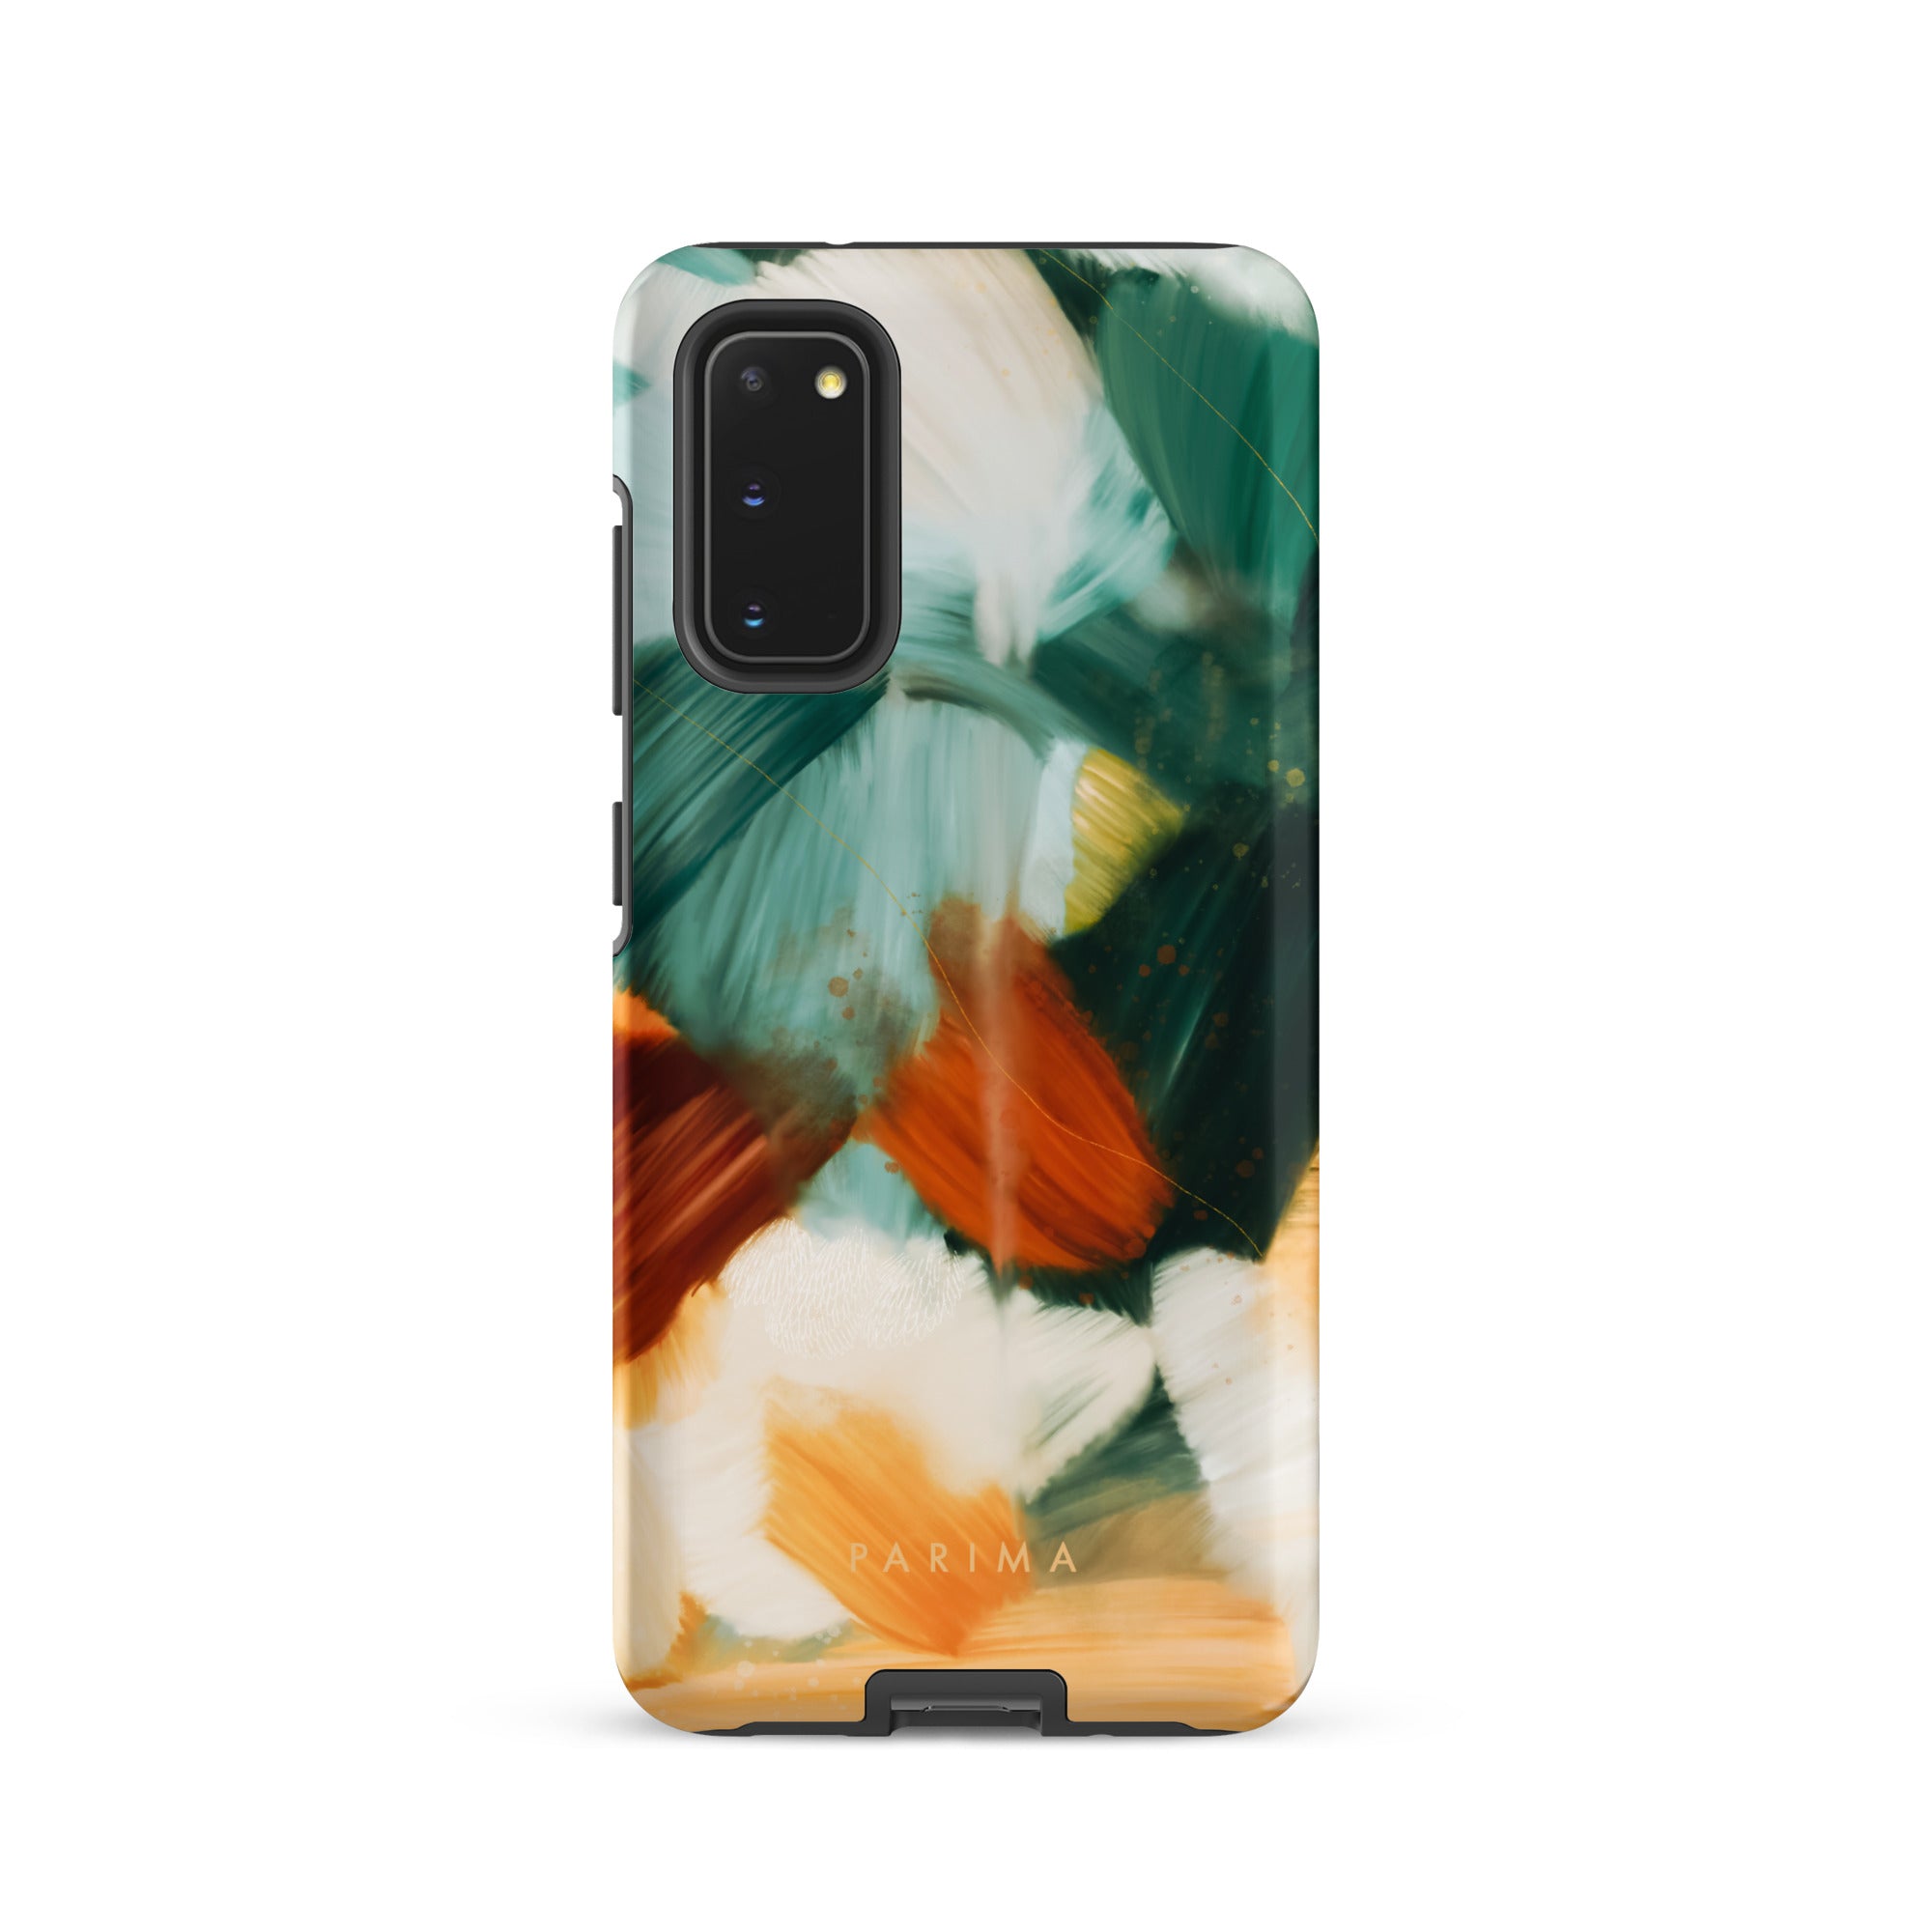 Meridian, green and orange abstract art on Samsung Galaxy S20 tough case by Parima Studio